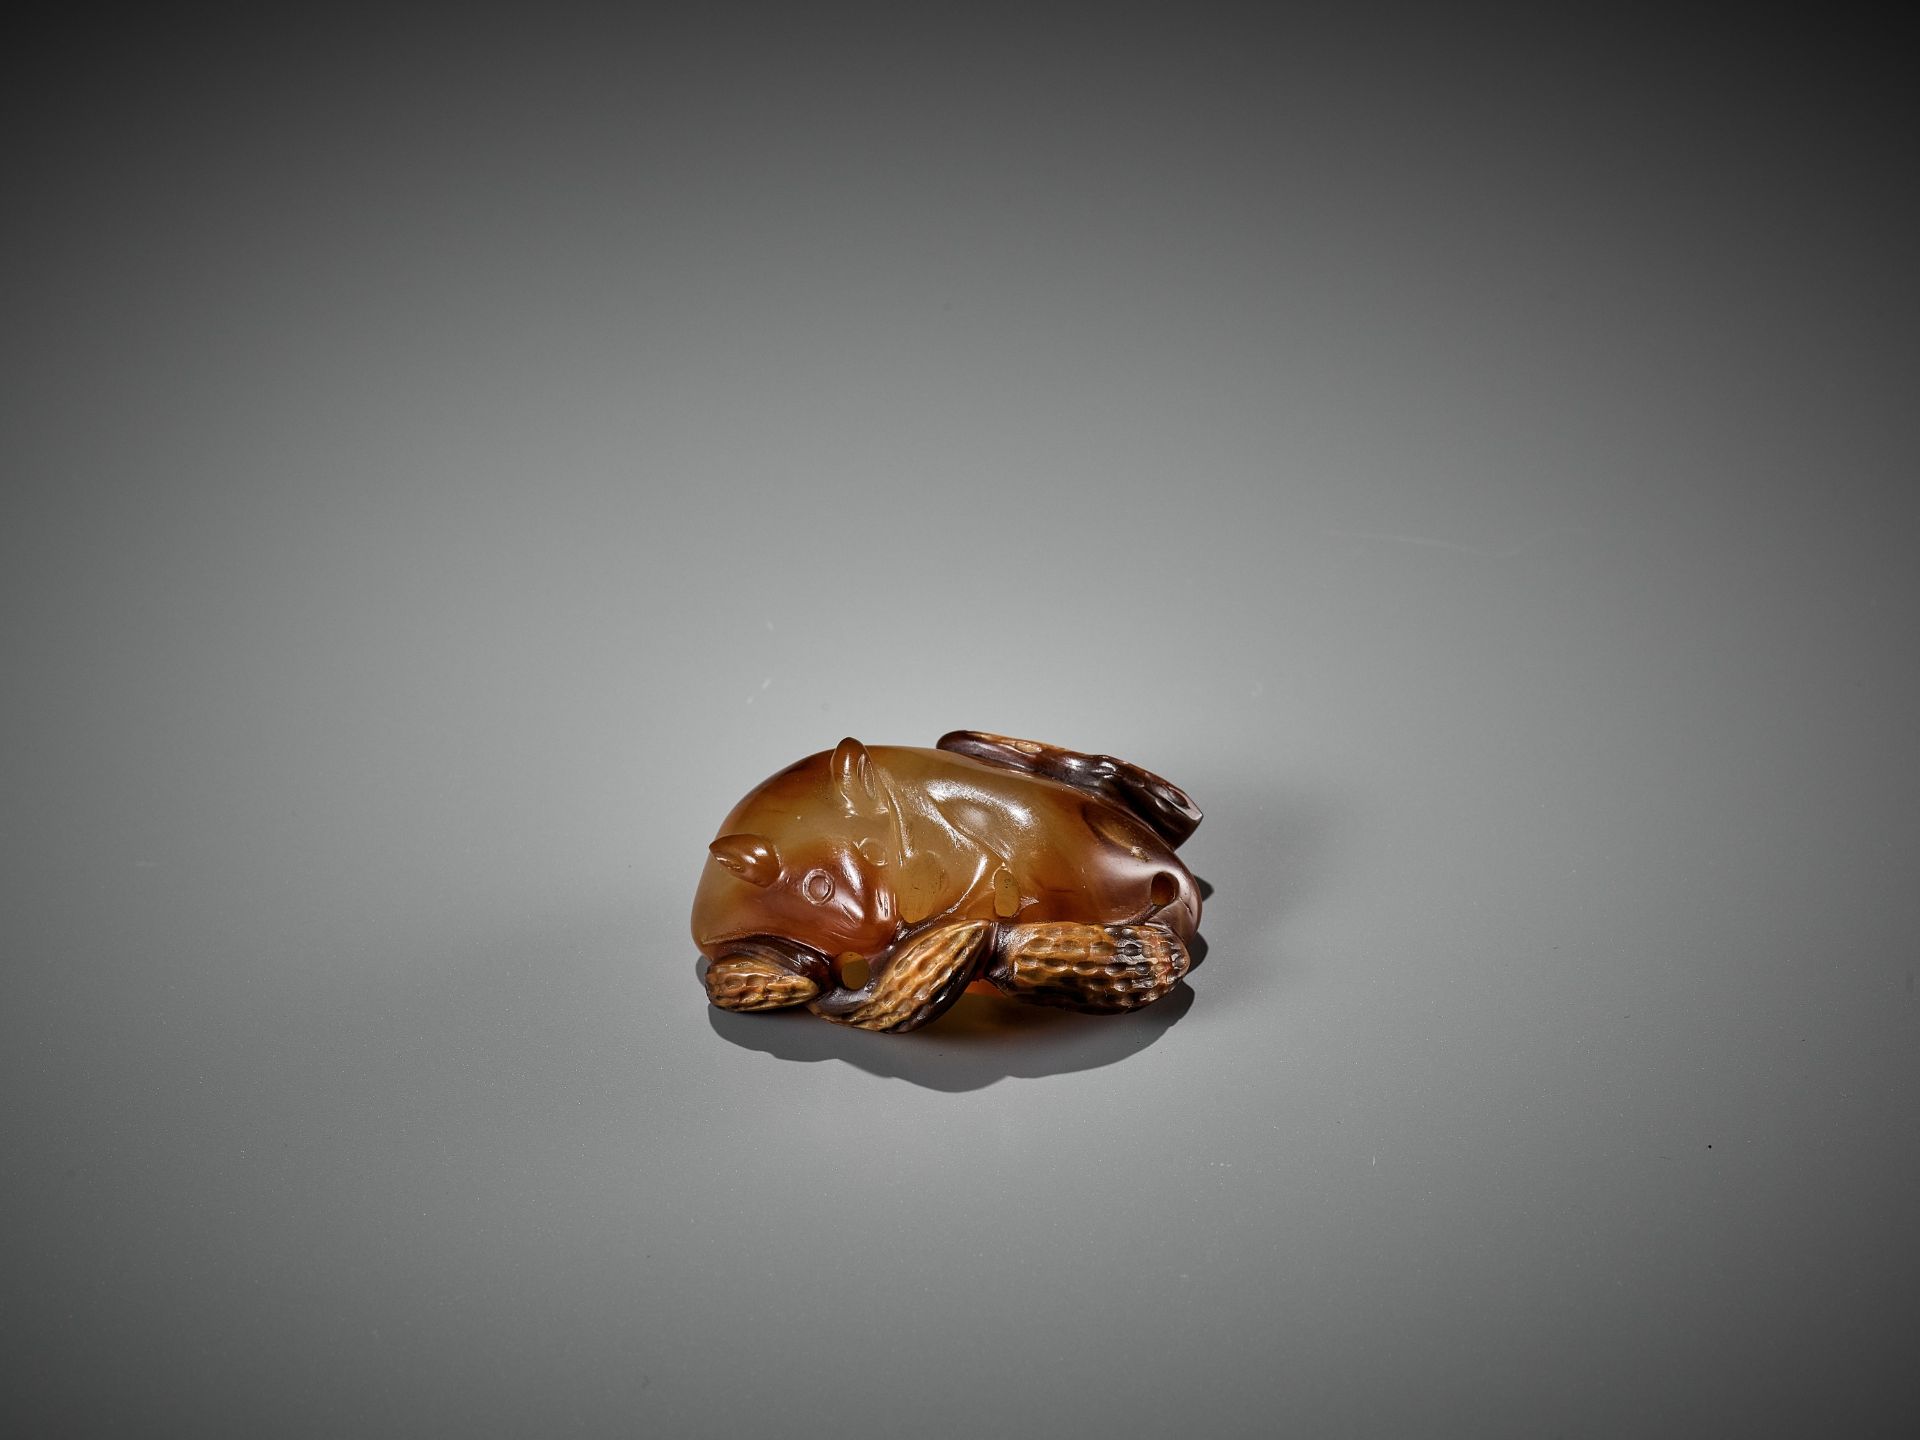 AN AGATE PENDANT OF A SQUIRREL WITH PEANUTS, 18TH-19TH CENTURY - Bild 6 aus 14